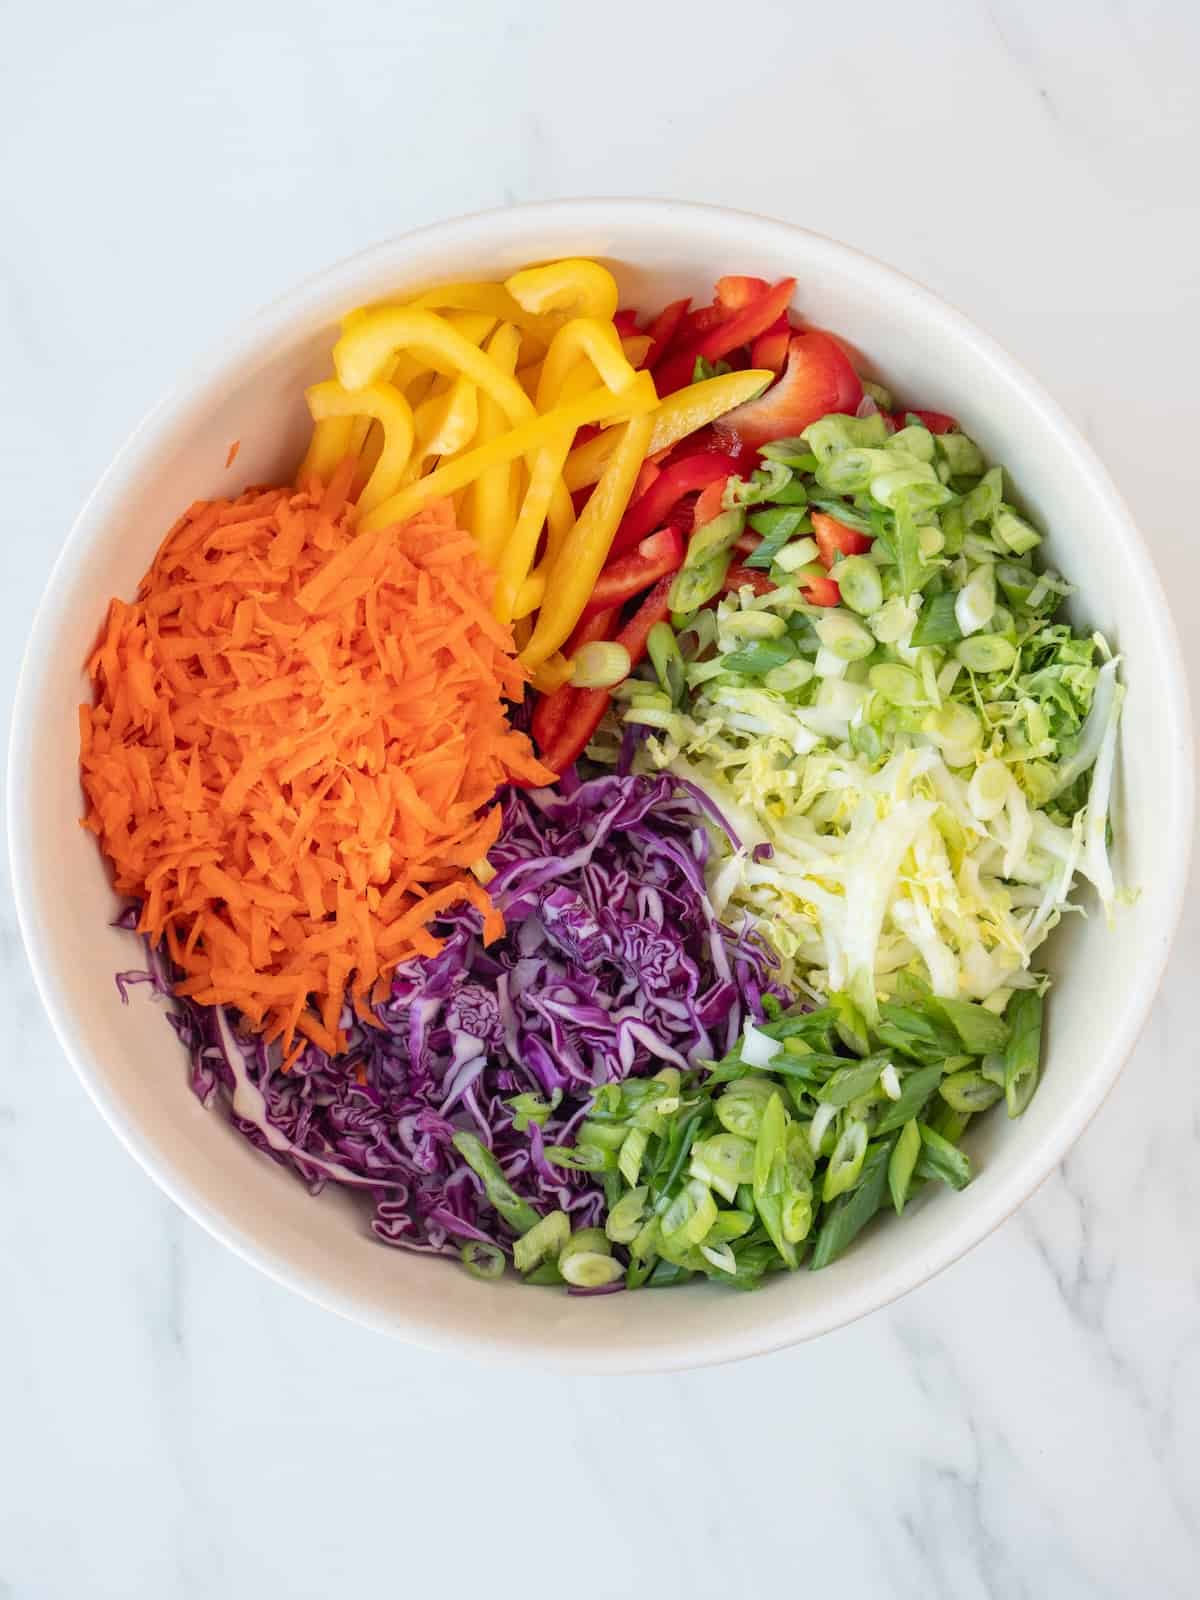 A bowl with thinly sliced napa cabbage, red cabbage, sliced bell peppers, carrots and green onions.